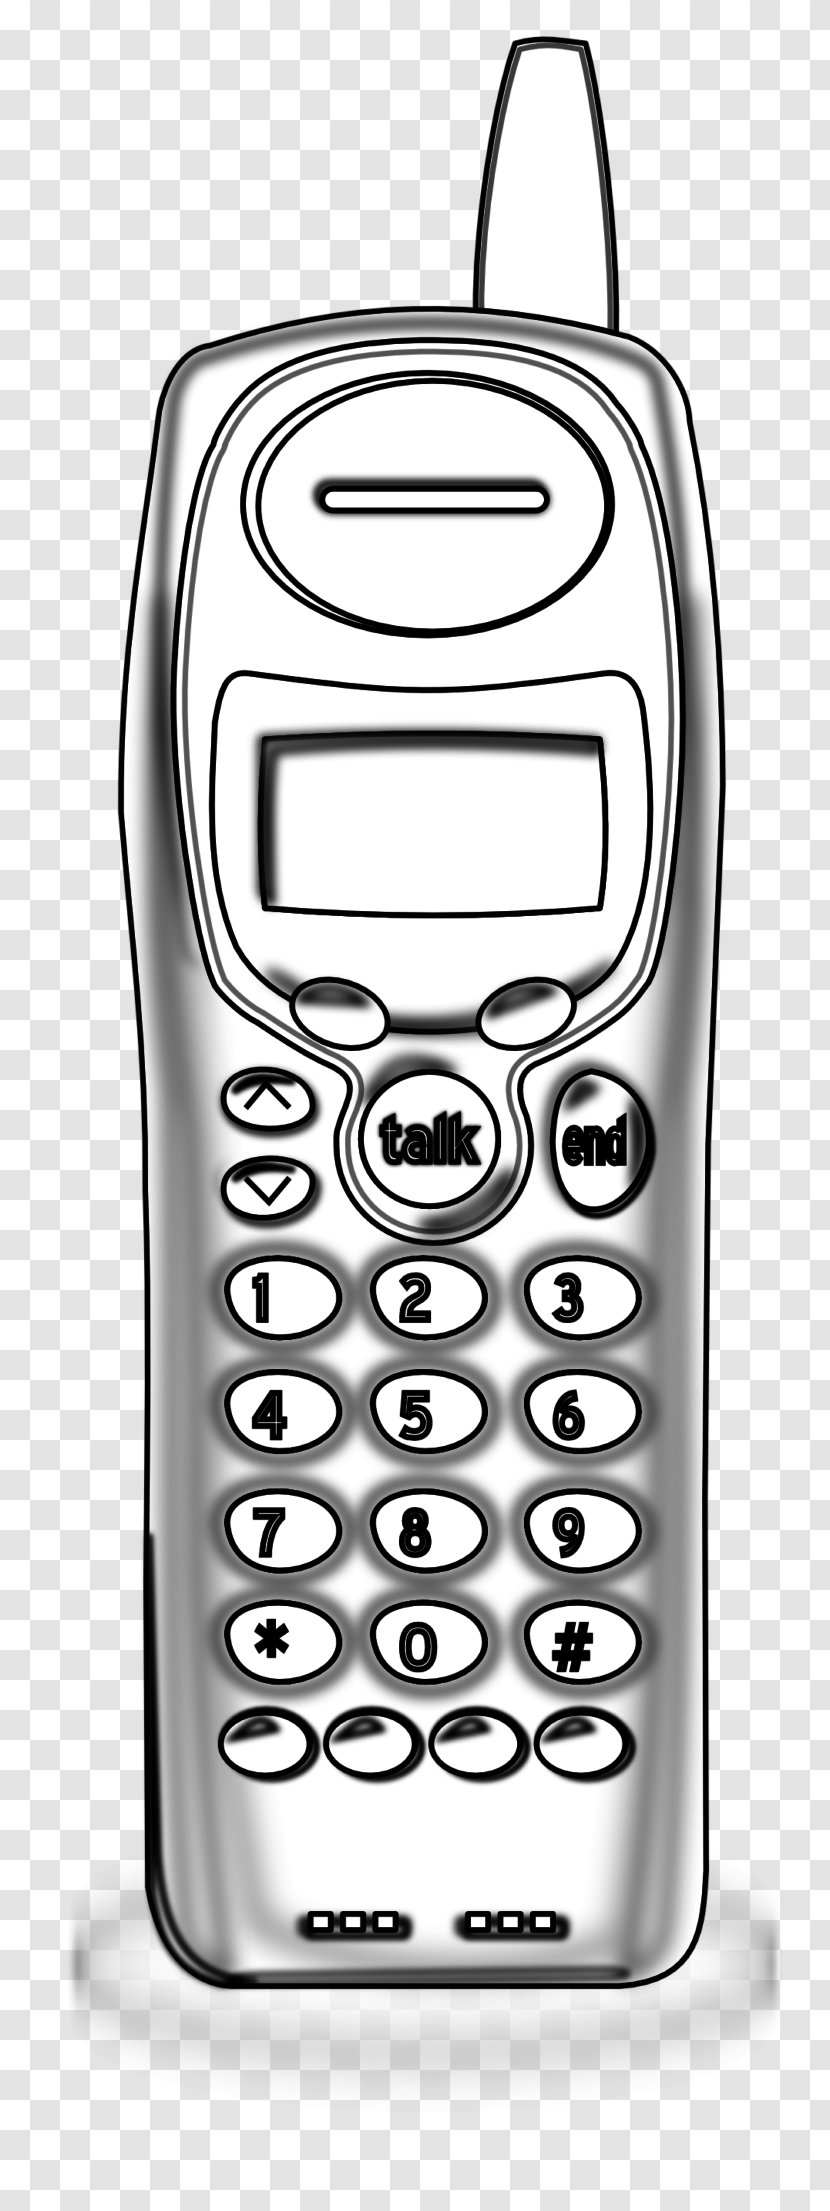 Coloring Book Cordless Telephone Chatter IPhone - Cell Phone Cartoon Transparent PNG